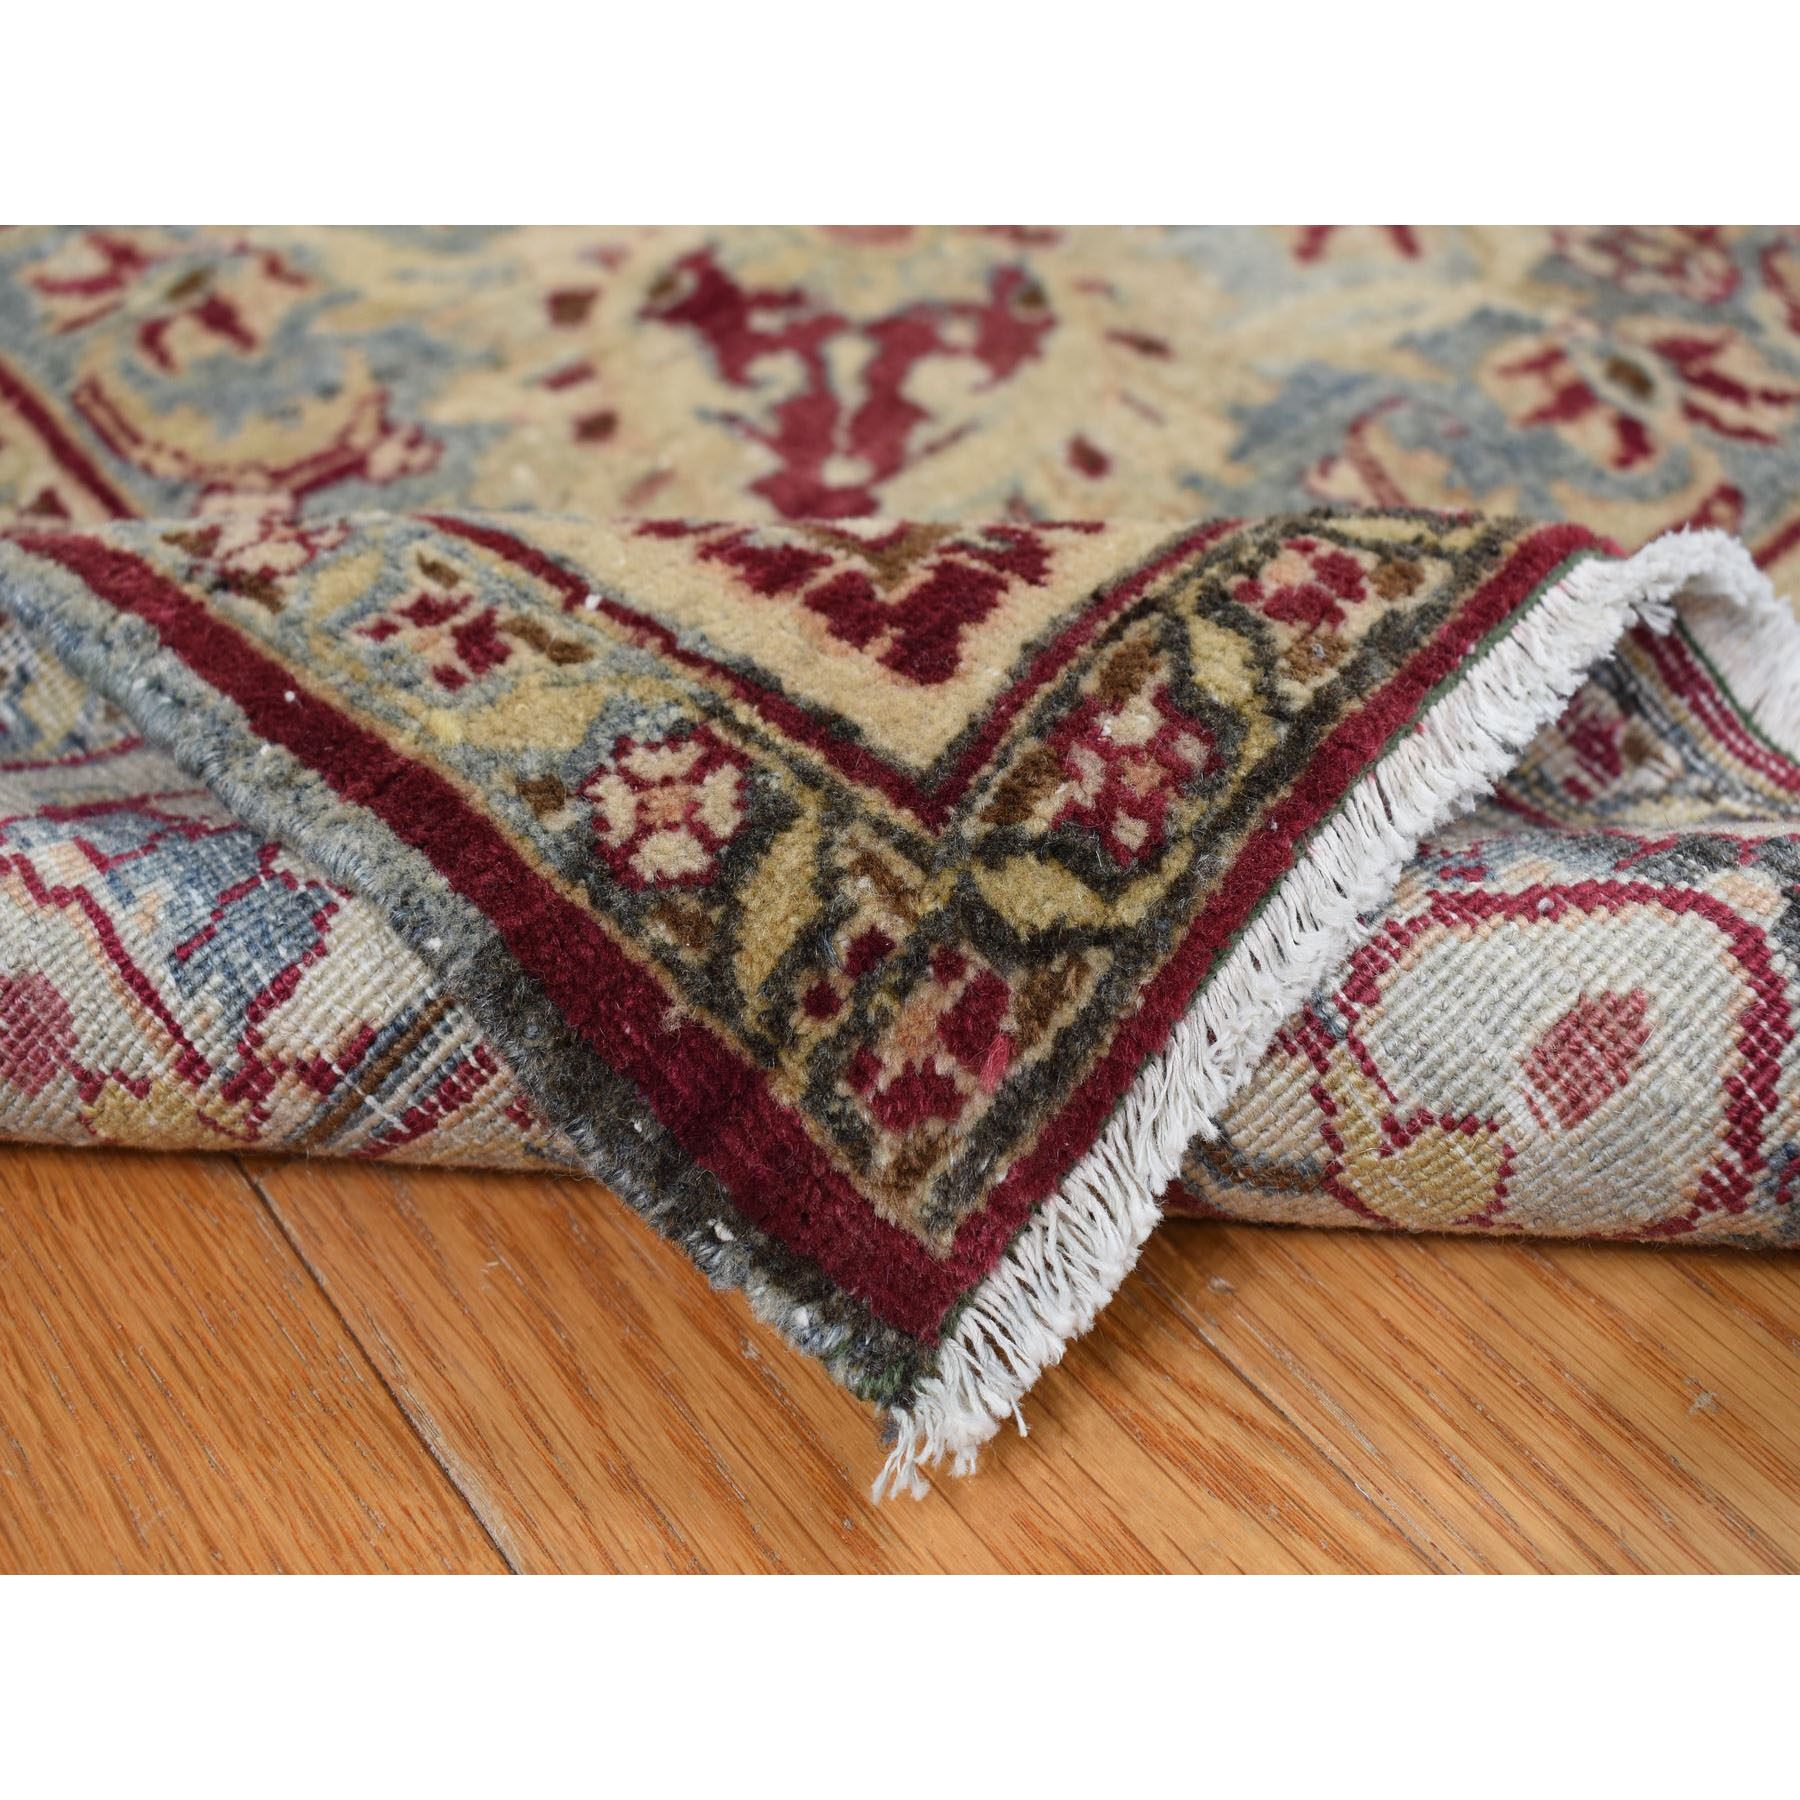  Wool Hand-Knotted Area Rug 8'9